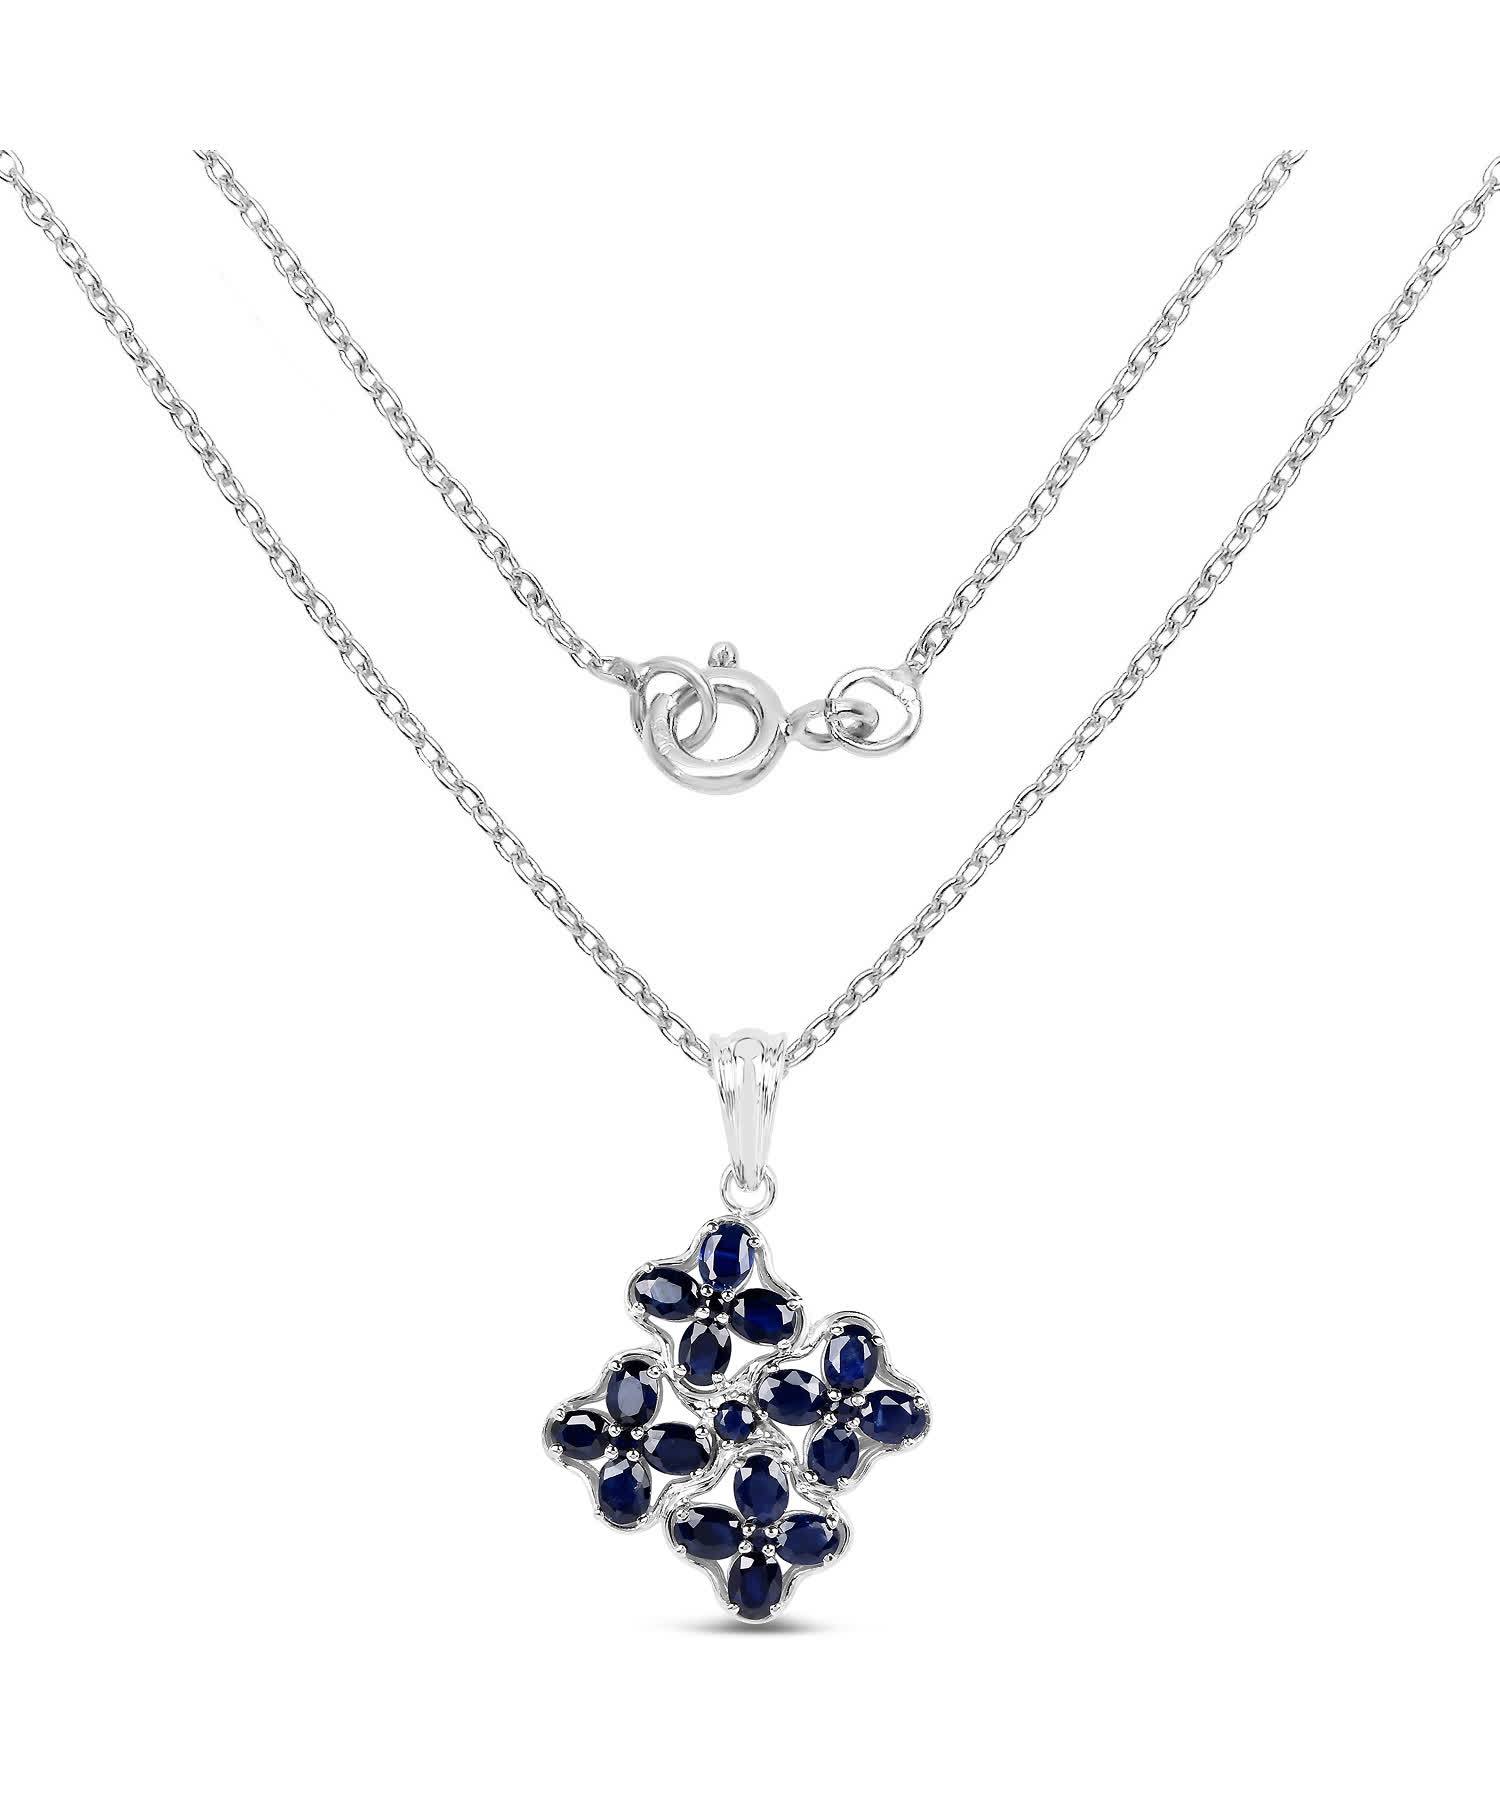 3.68ctw Natural Midnight Blue Sapphire Rhodium Plated 925 Sterling Silver Flower Pendant With Chain View 2